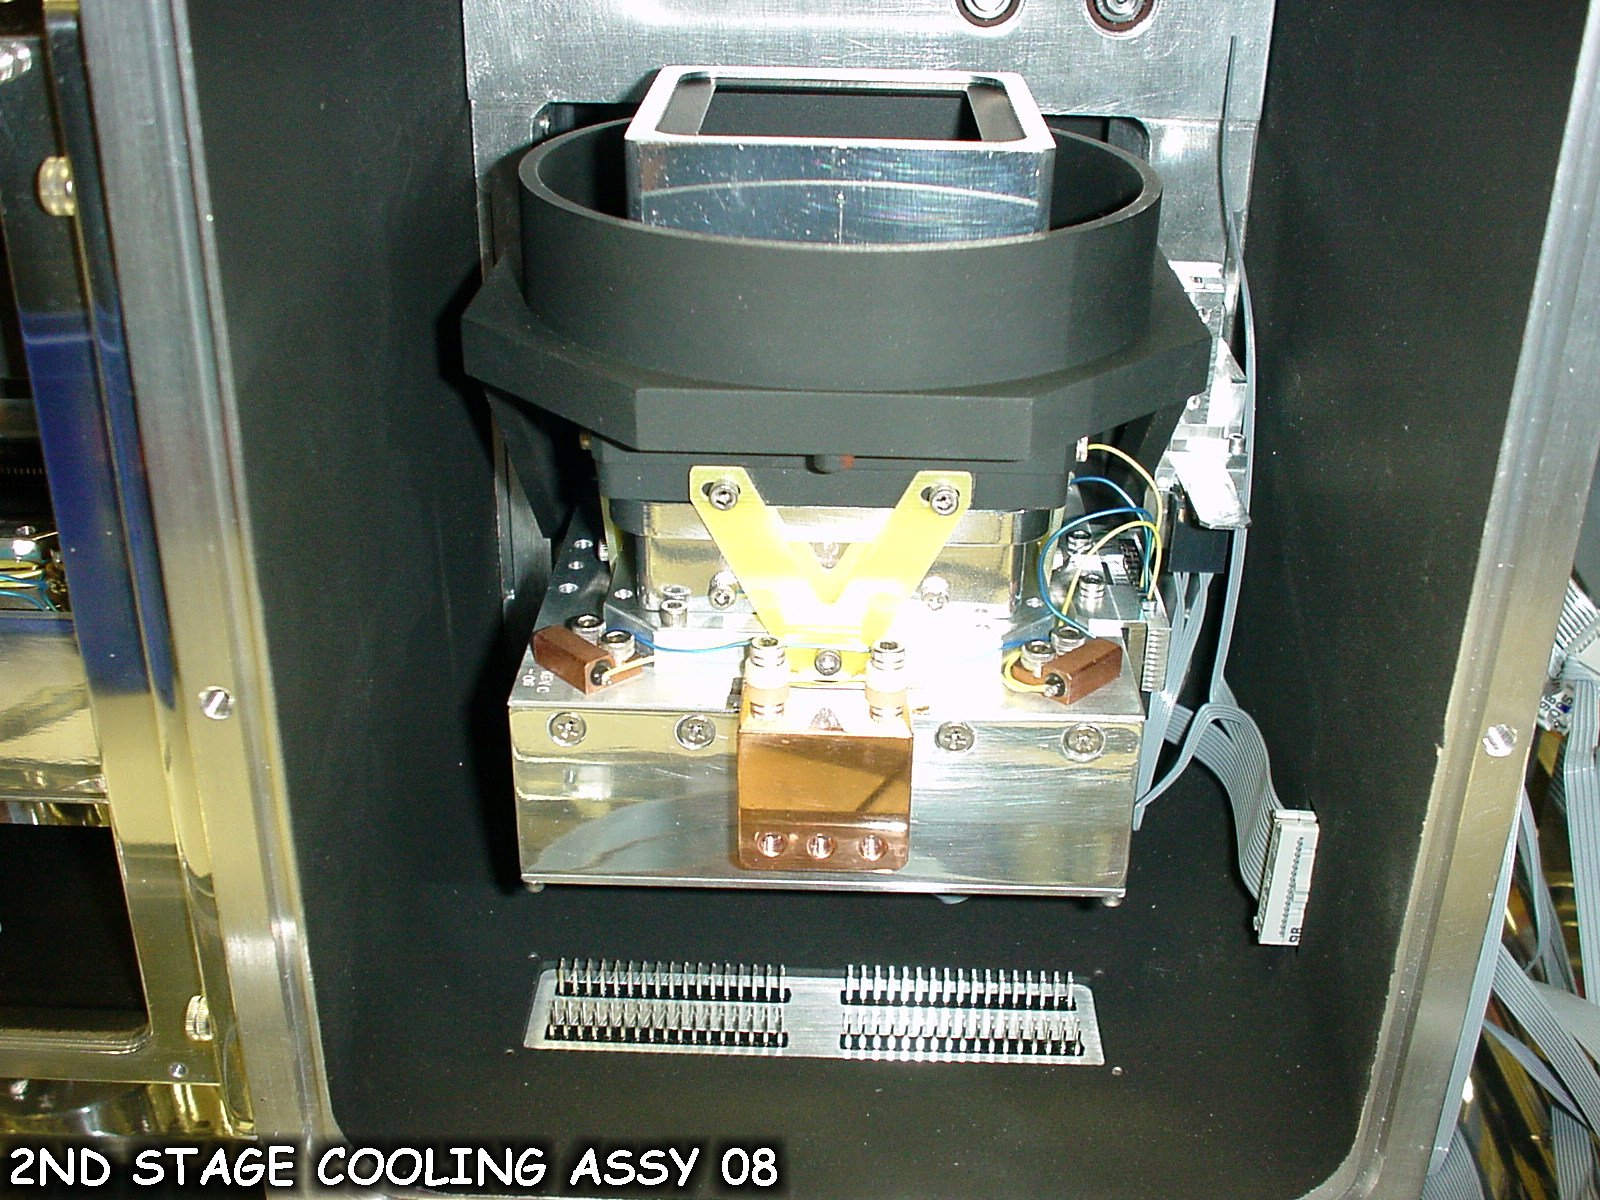 2nd Stage Cooling Assy 08